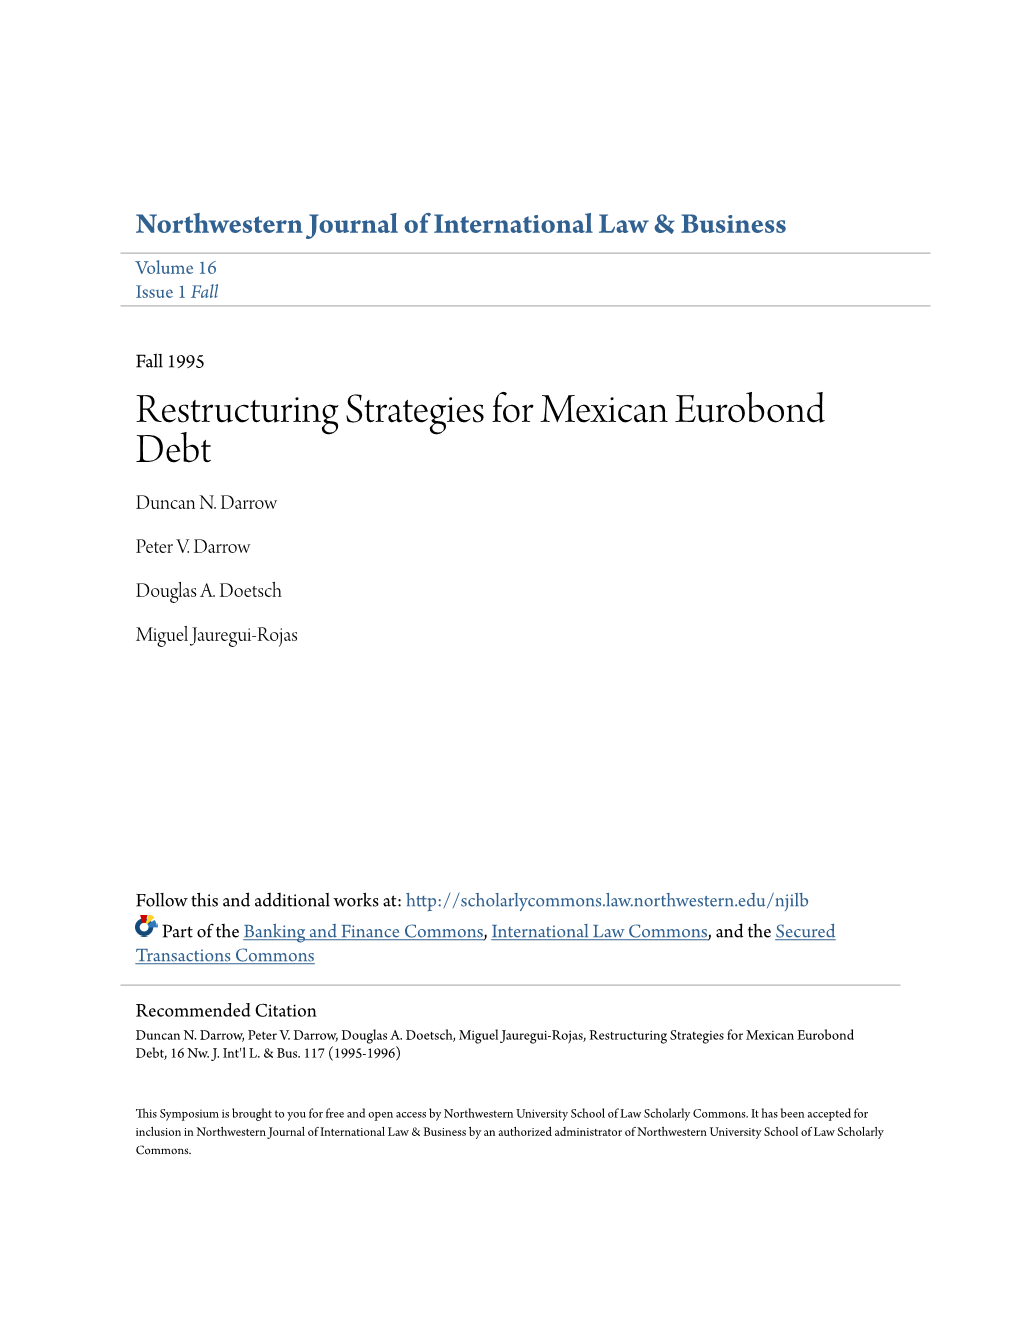 Restructuring Strategies for Mexican Eurobond Debt Duncan N